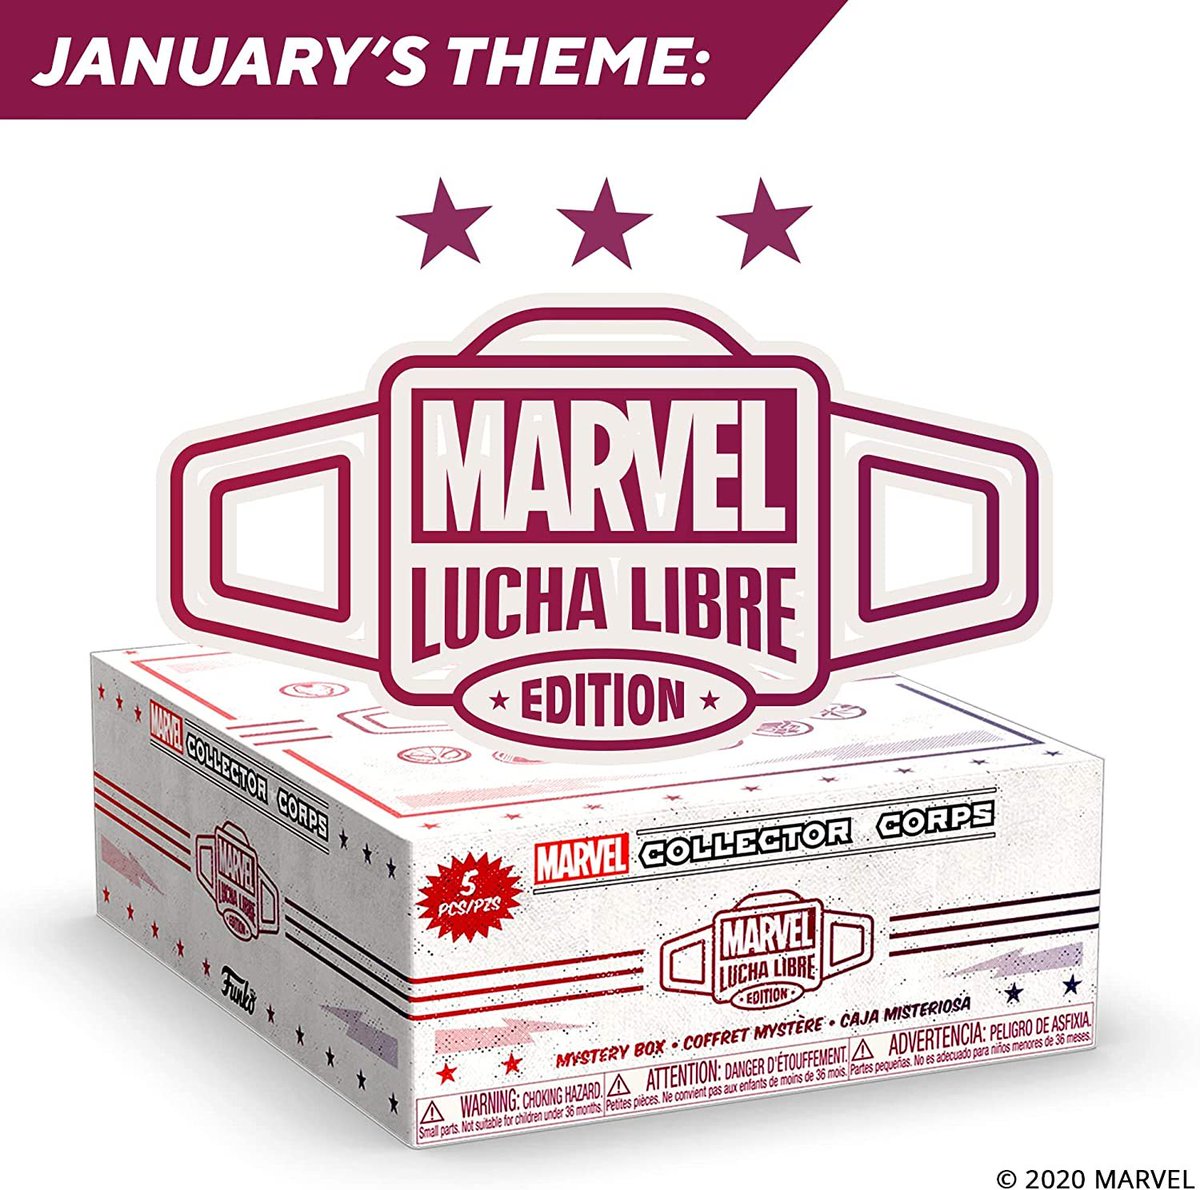 Funko stats this box will contain 3 POPs! A few weeks left to subscribe to the latest Collector Corps edition at the link below ~
Linky ~ amzn.to/39g0com
#Ad #FPN #FunkoPOPNews #Funko #POP #Funkos #POPVinyl #FunkoPOP #FunkoPOPs #LuchaLibre #CollectorCorps